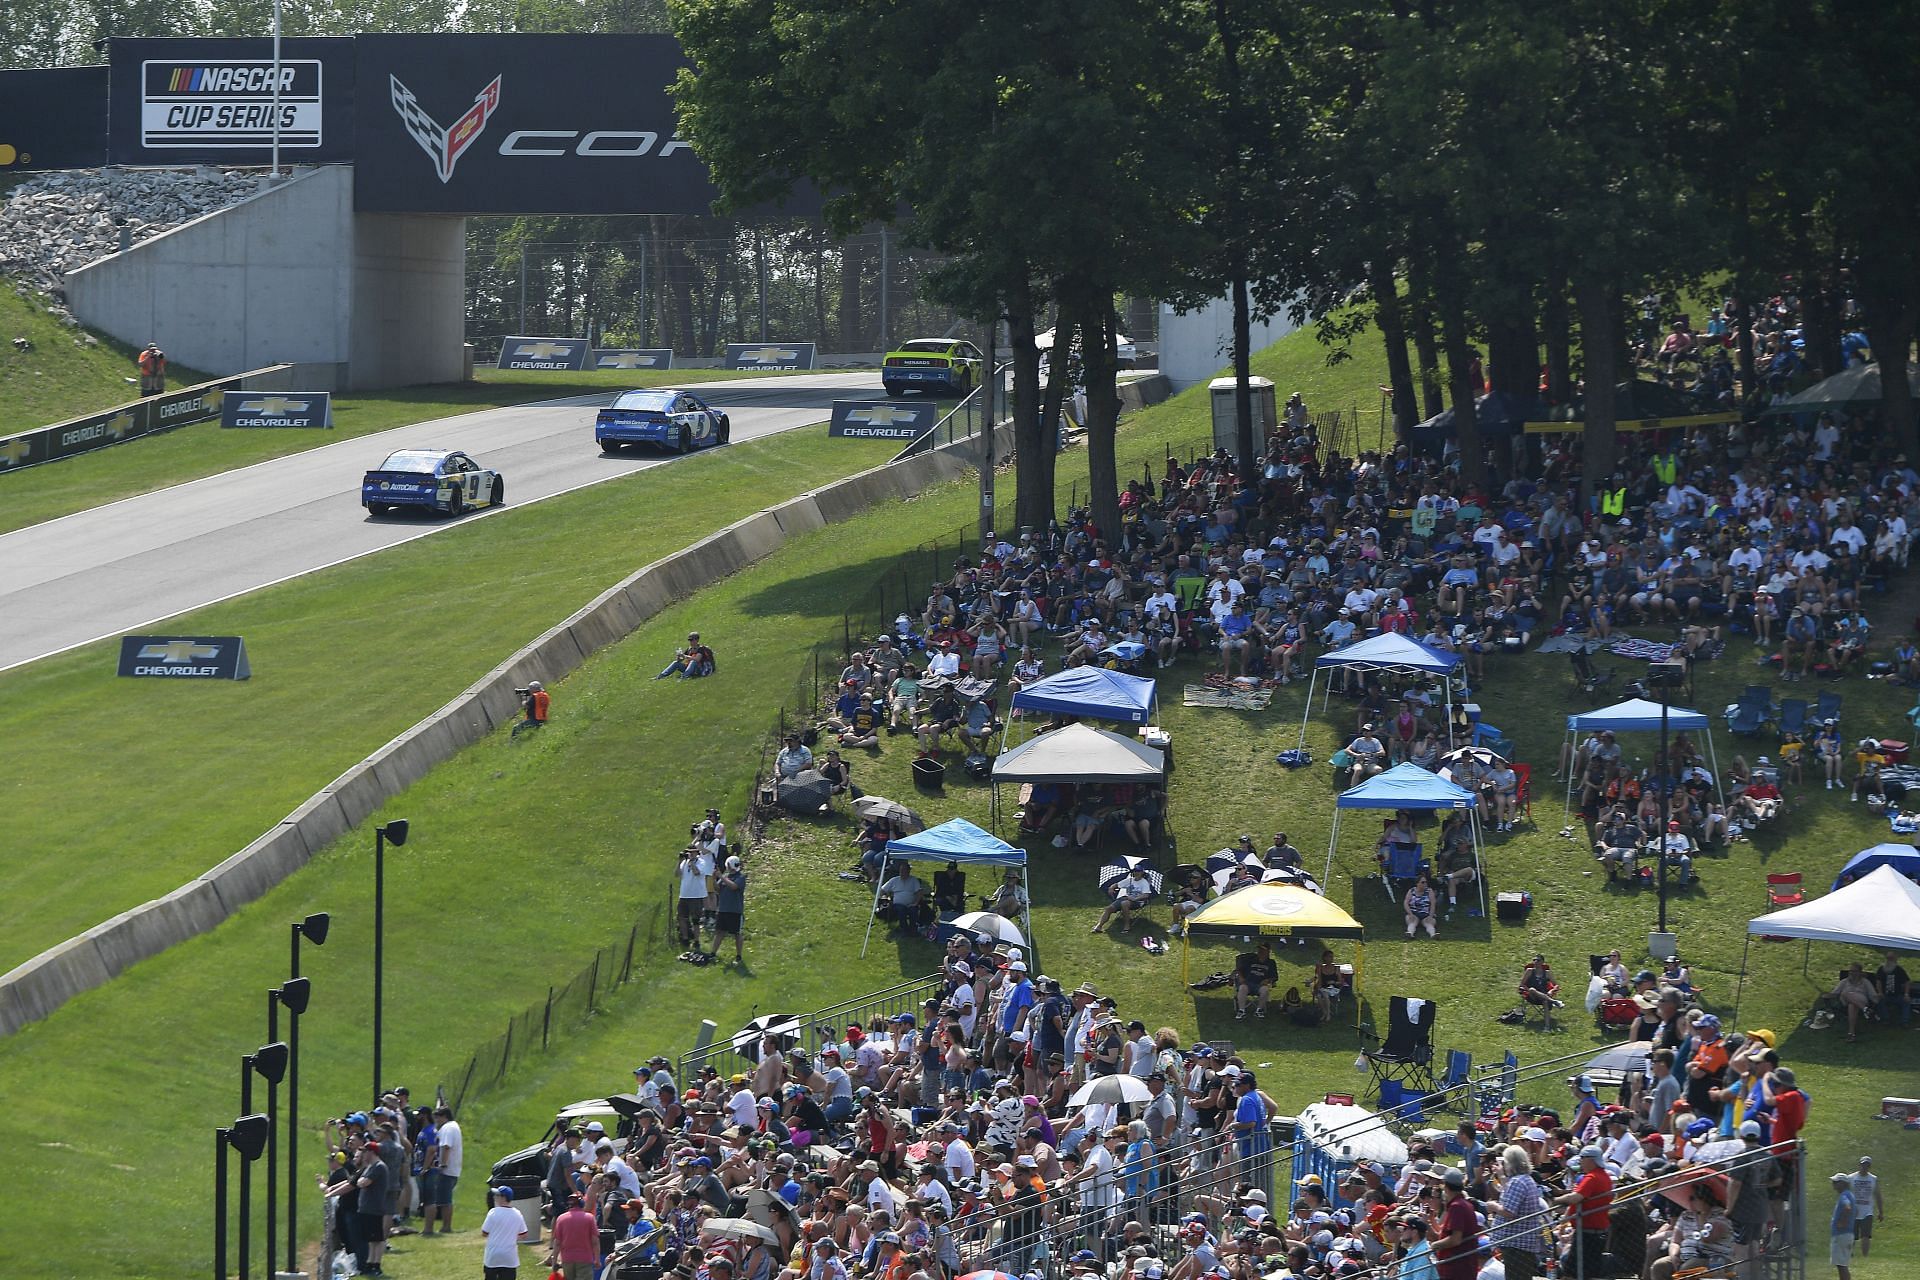 A general view of NASCAR fans on a grassy field and under canopies watching the NASCAR Cup Series Jockey Made in America 250 Presented by Kwik Trip at Road America (Photo by Logan Riely/Getty Images)